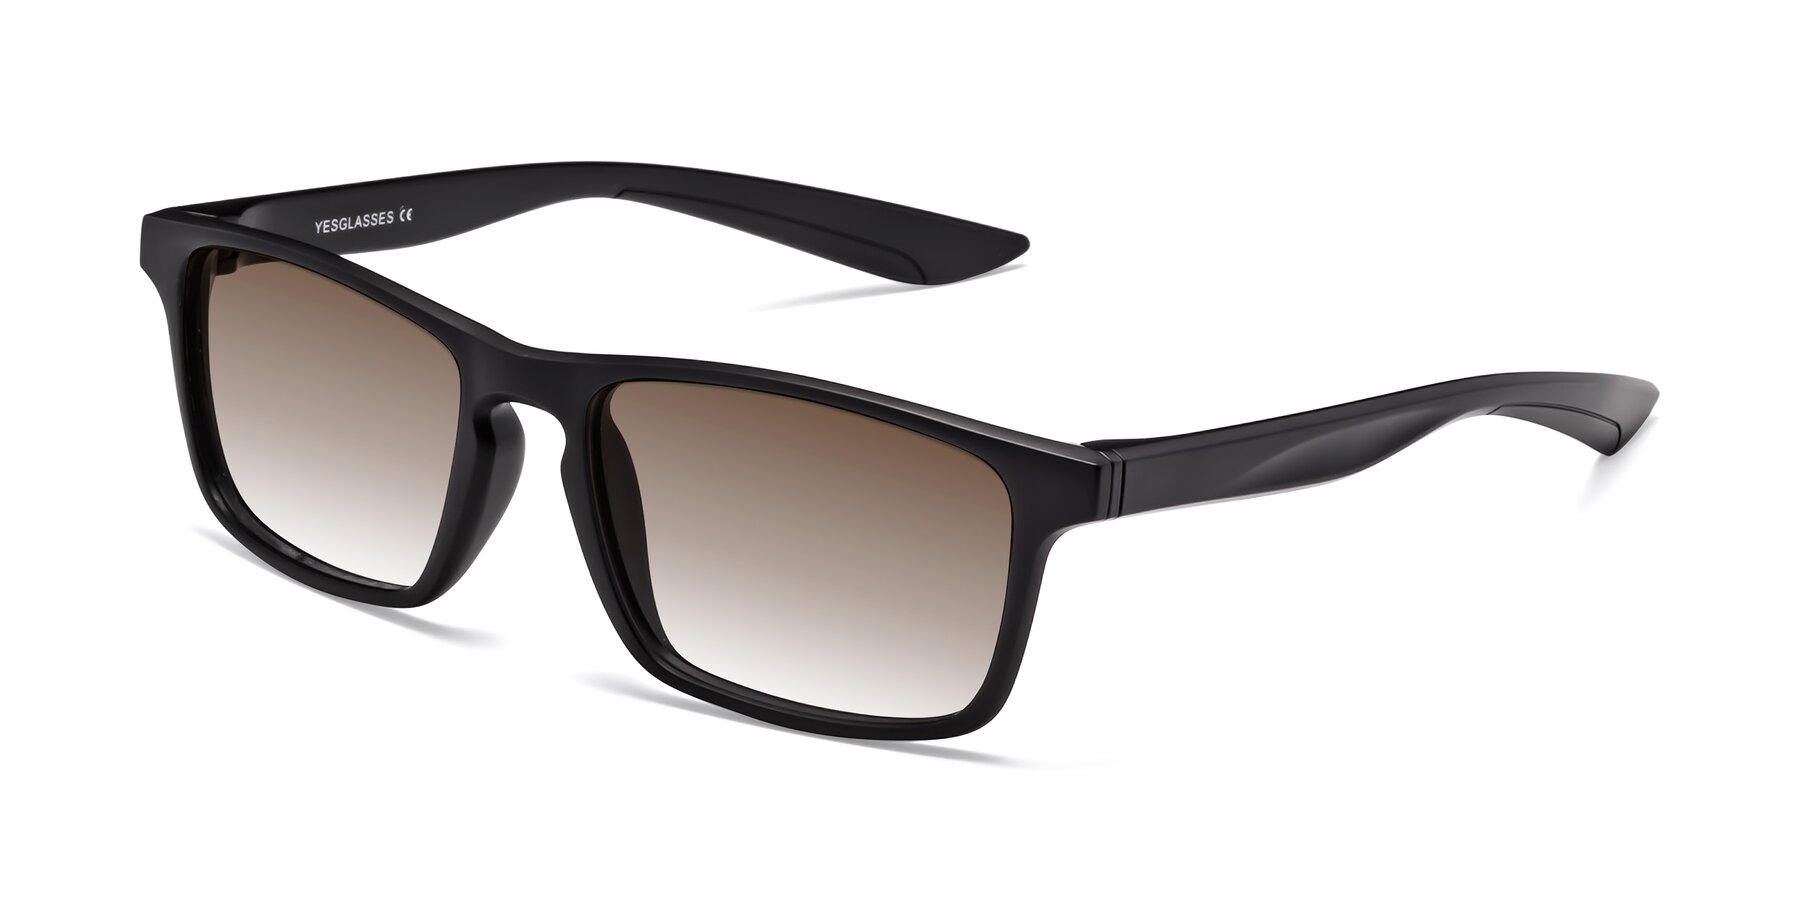 Angle of Passion in Matte Black with Brown Gradient Lenses